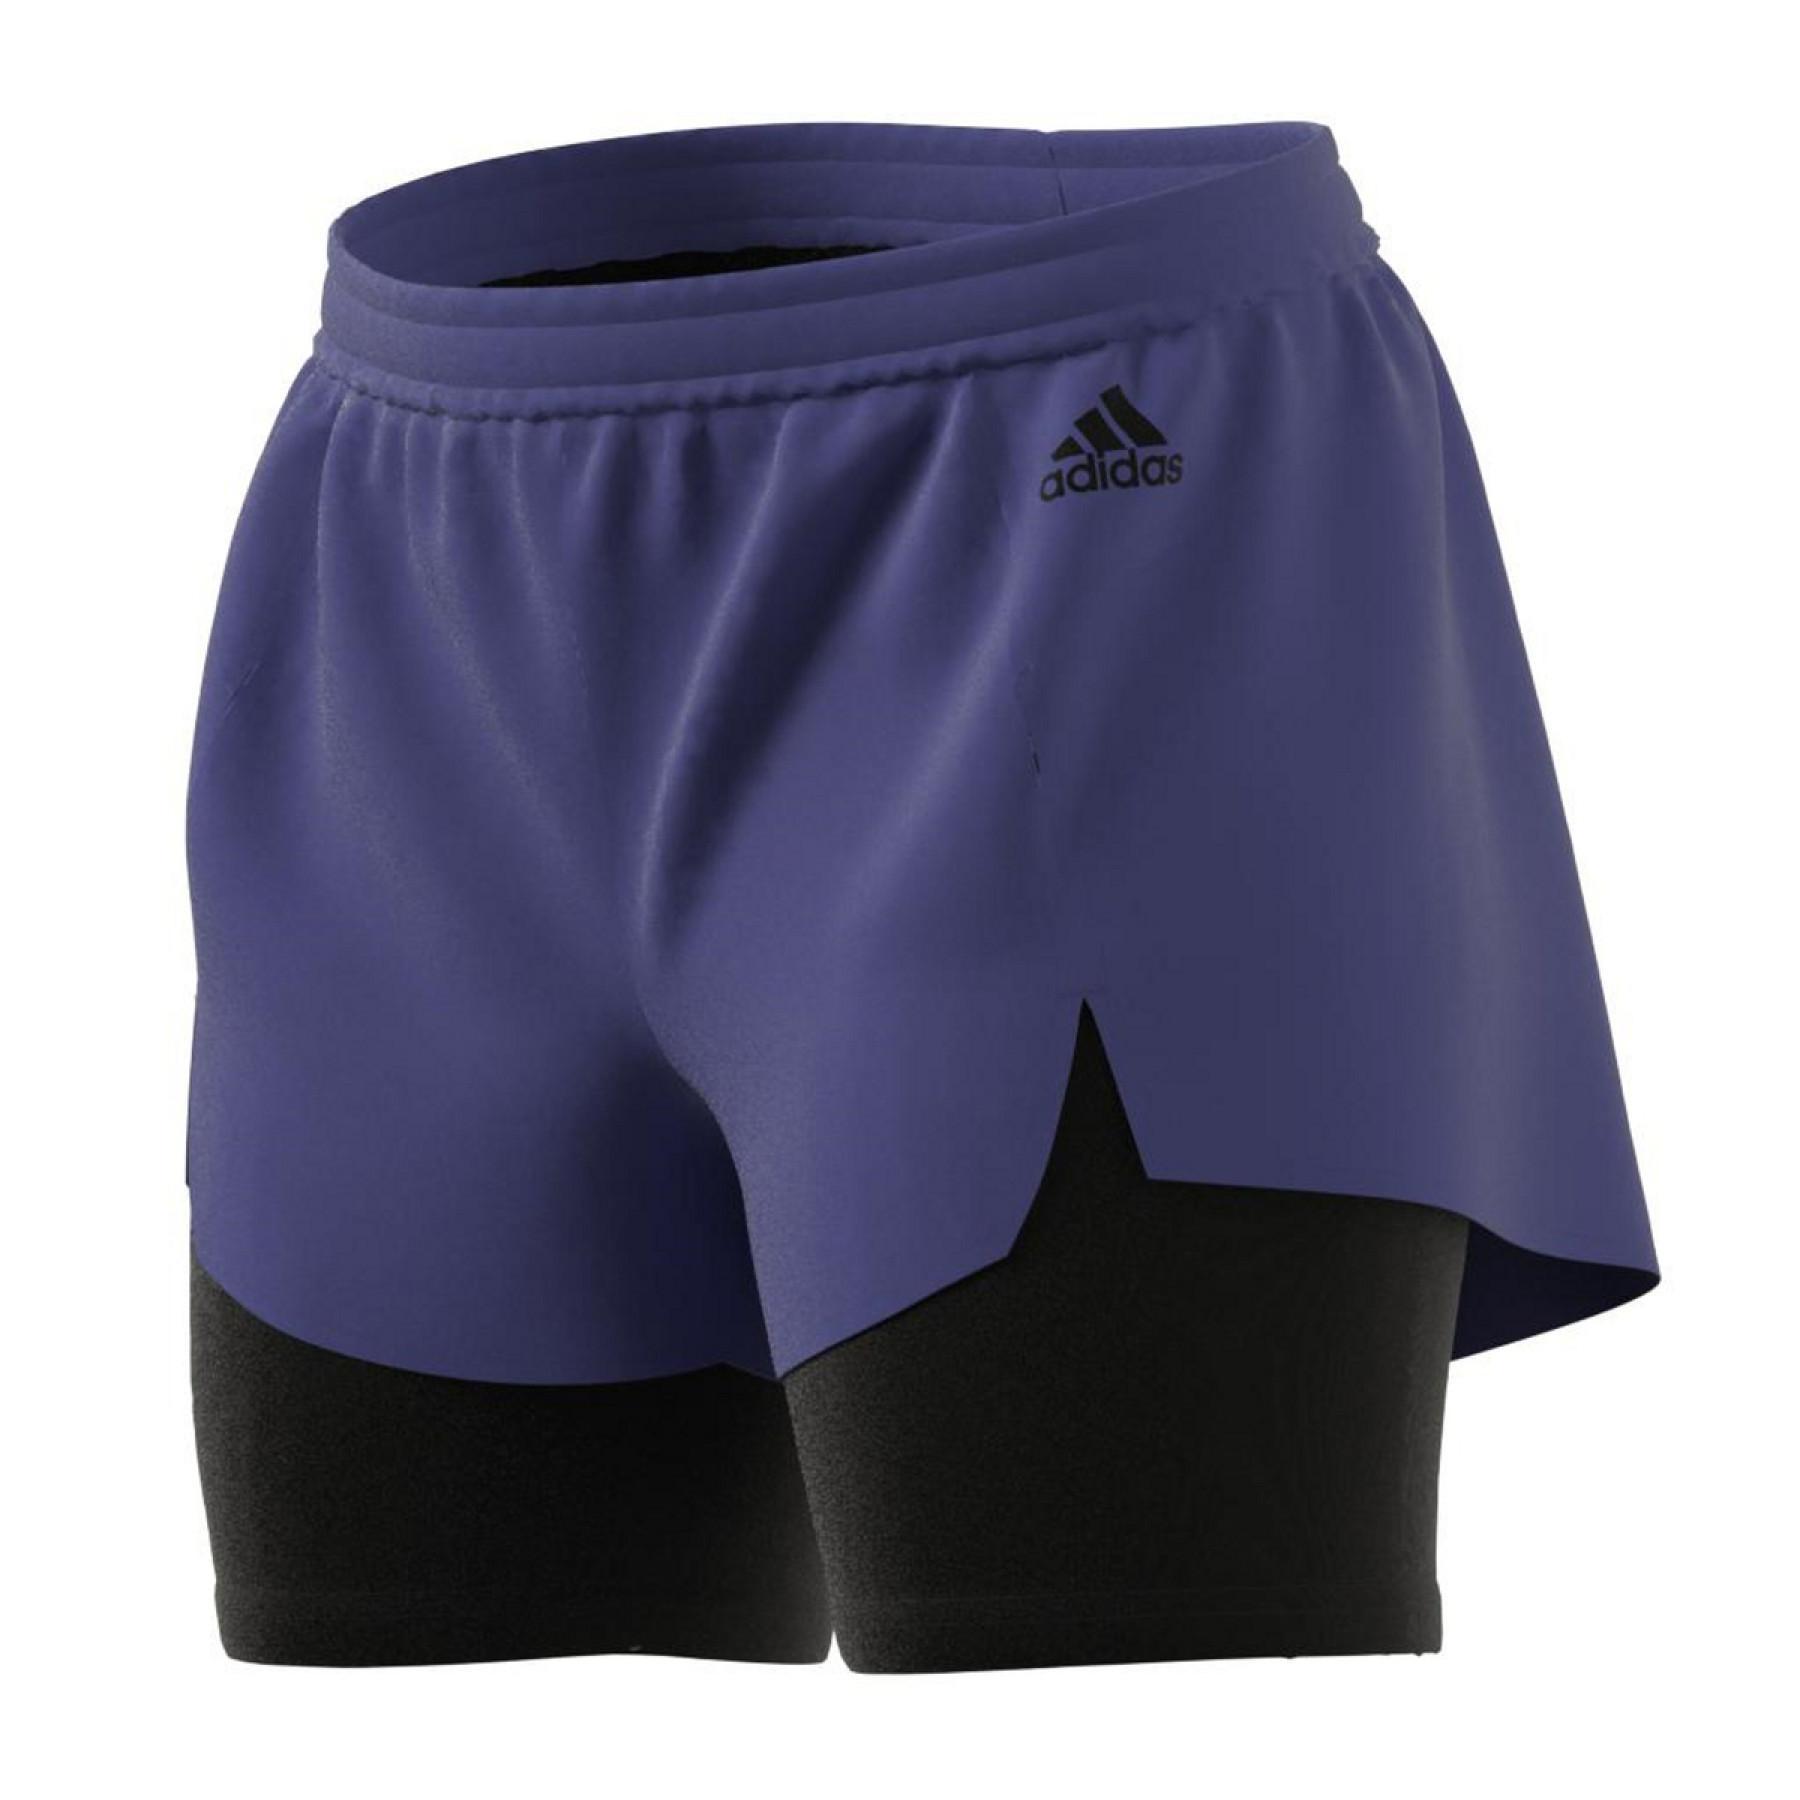 Dames shorts adidas Primeblue Designed To Move 2-in-1port